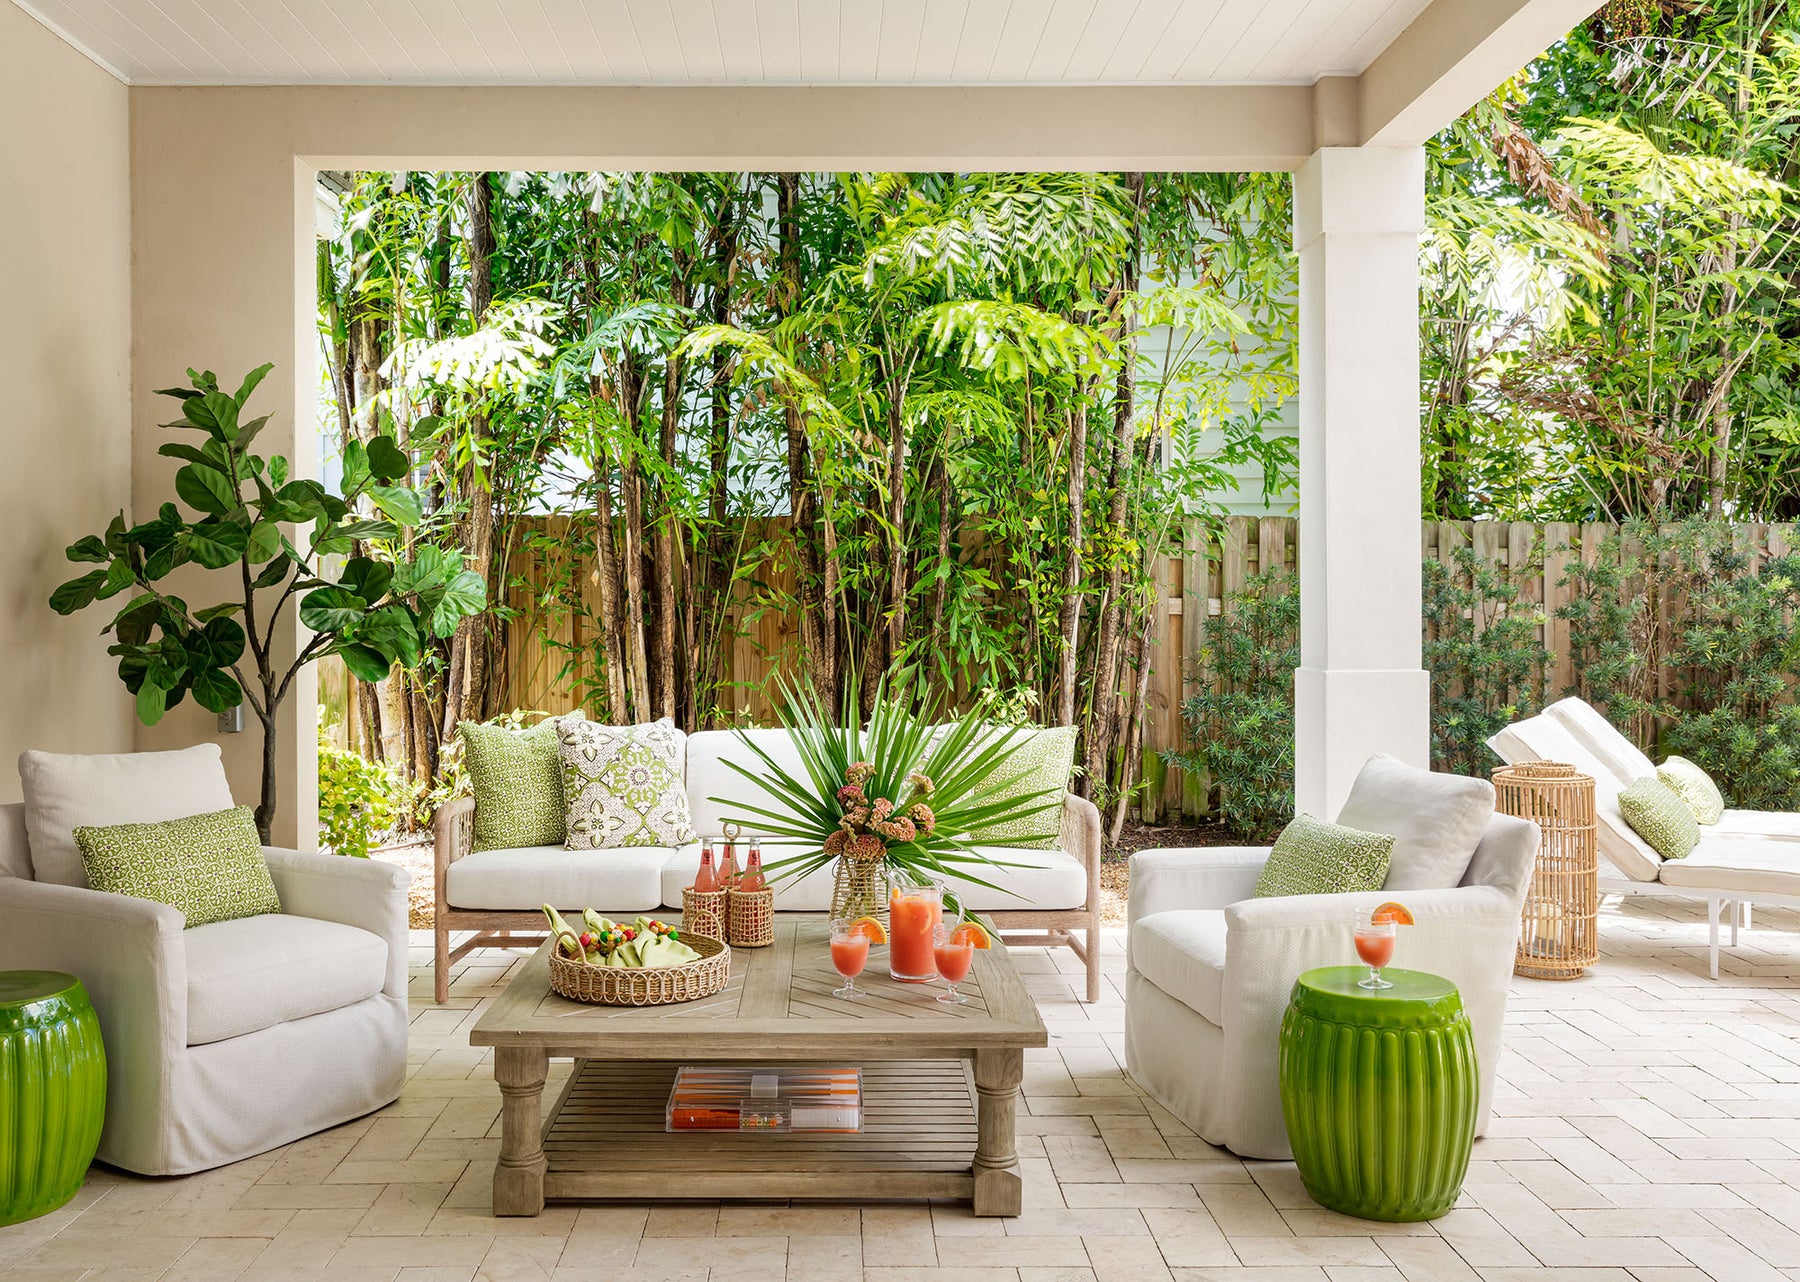 image of tropical patio setting with white sofa and chairs, green pillows and green garden stools